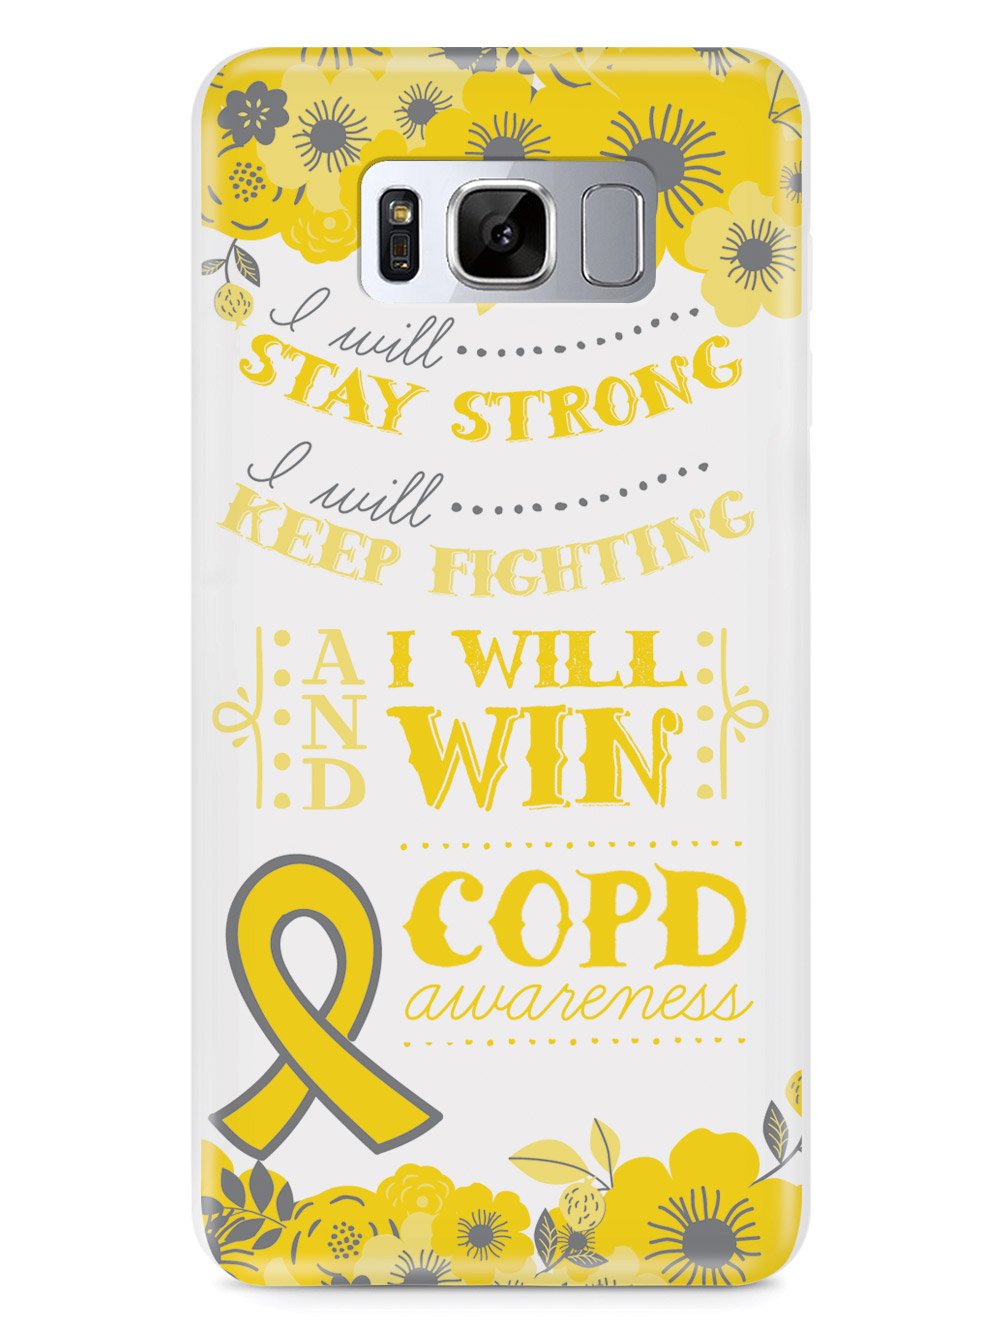 I Will Win - COPD Awareness Case